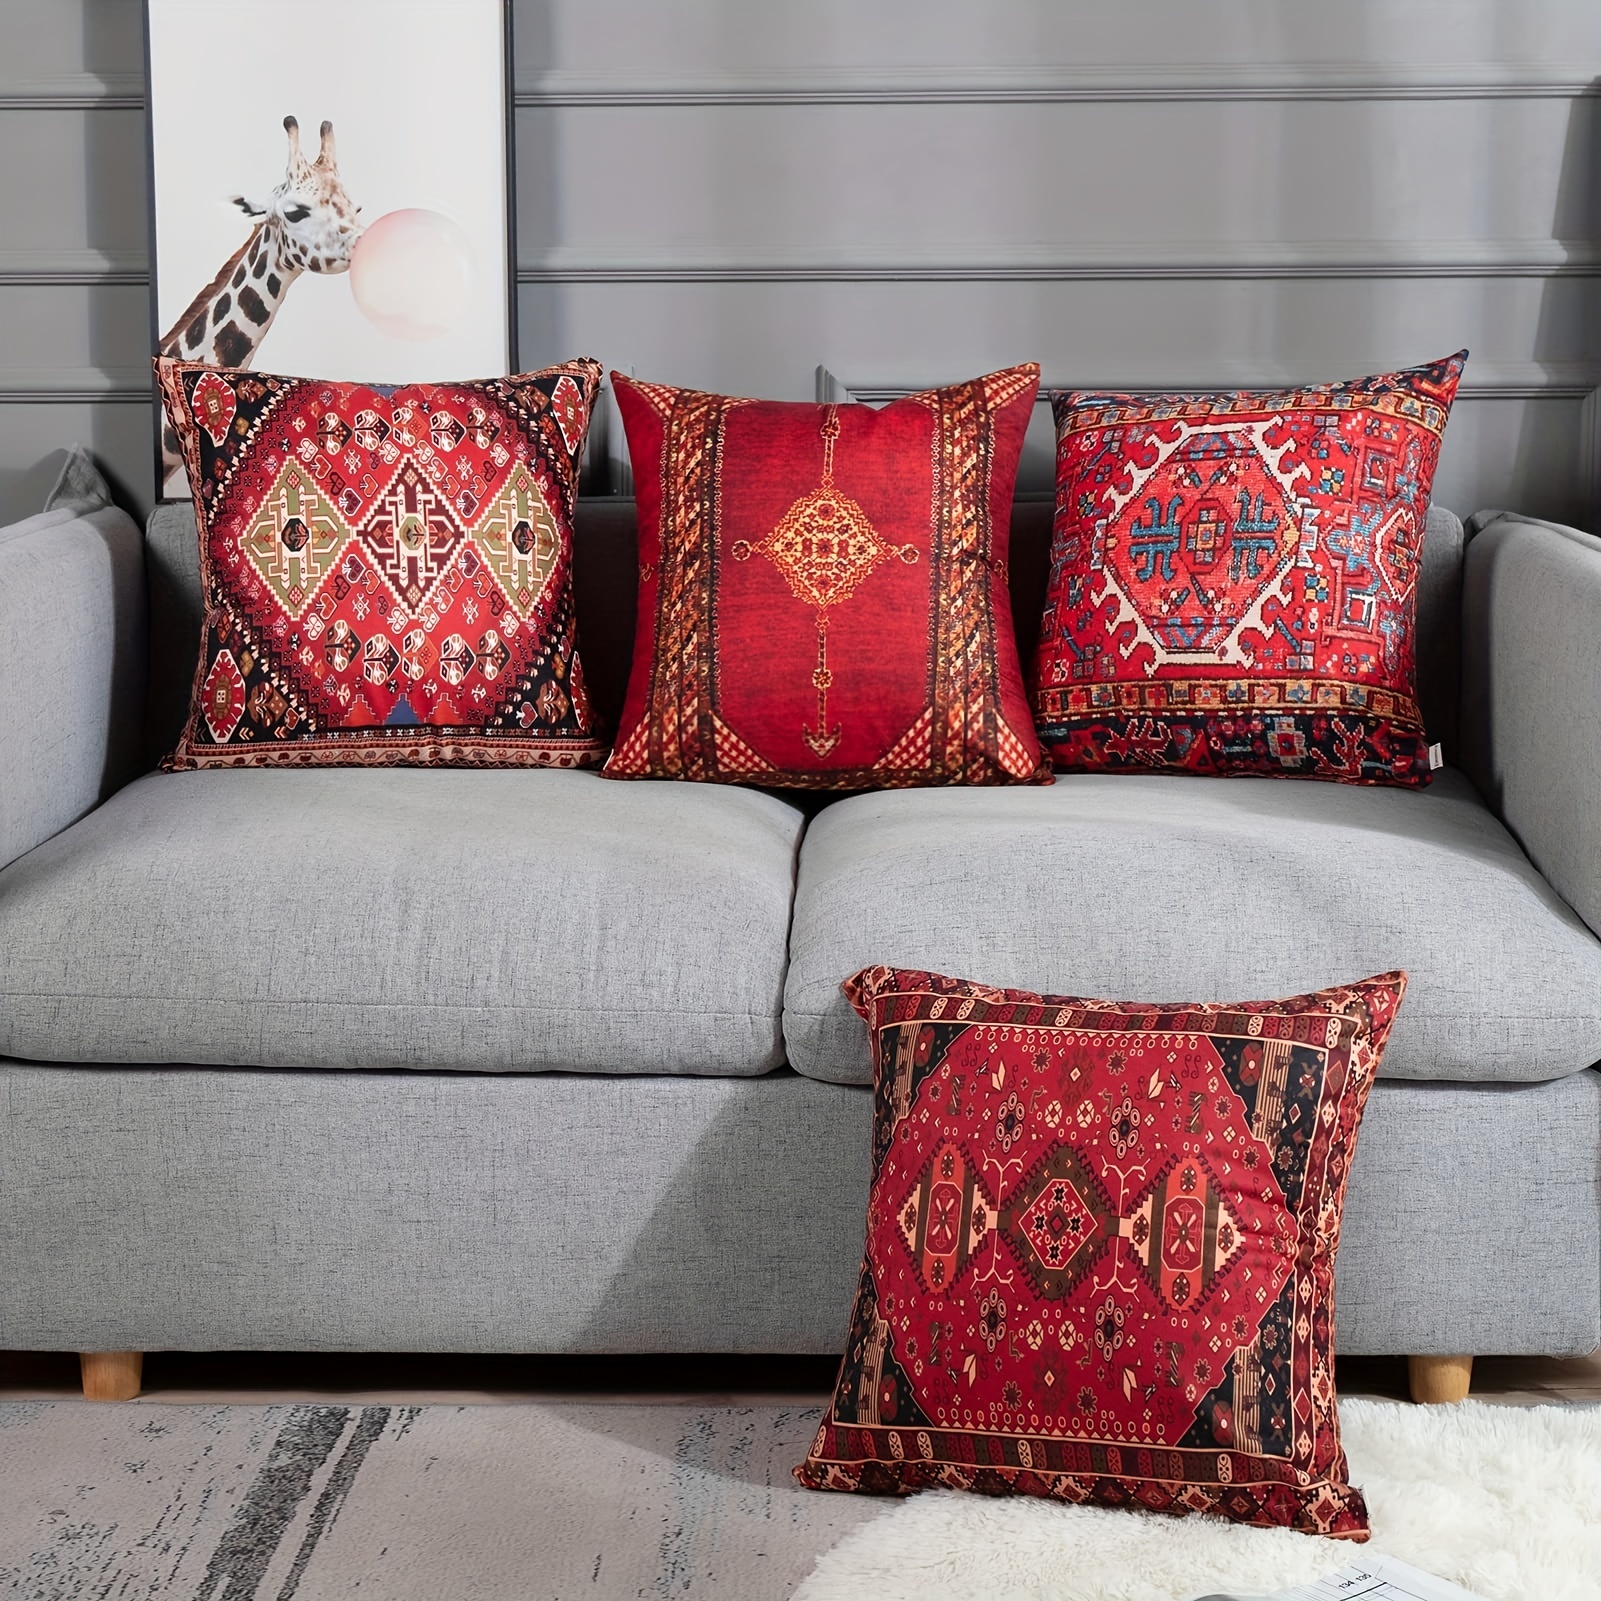 Angkor Series 16x16 Inch (40x40 cm) Decorative Throw Pillow Case Cushion  Cover For Sofa Couch Chair Bed Insert Not Included - AliExpress